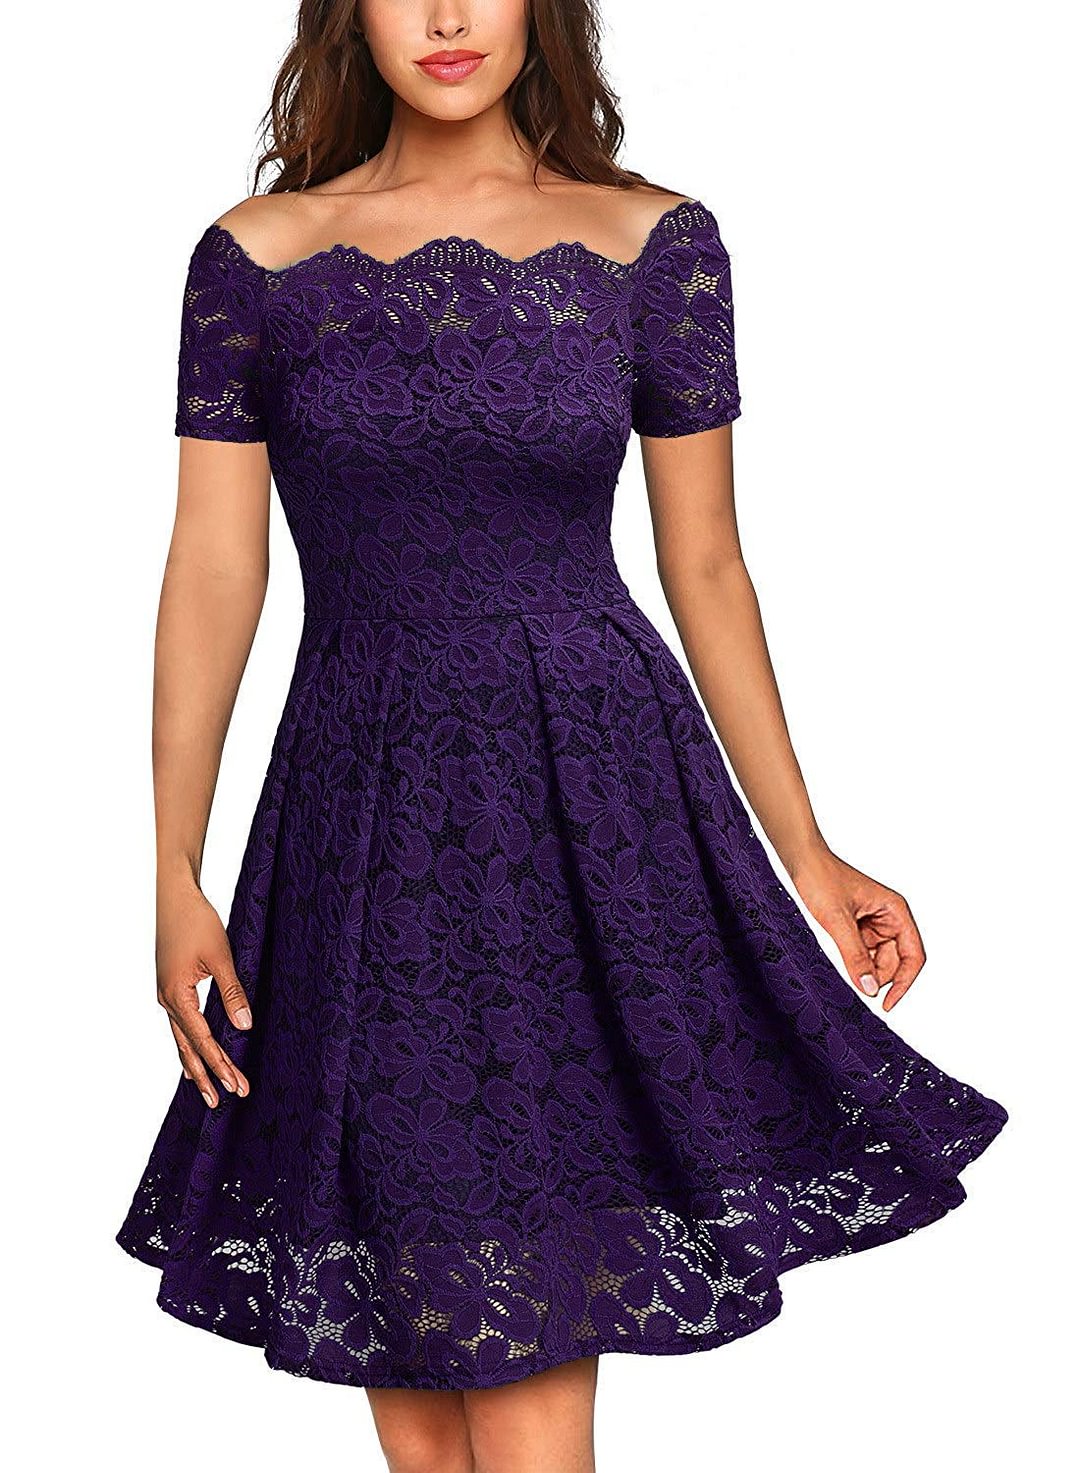 Women's Vintage Floral Lace Short Sleeve Boat Neck Cocktail Party Swing Dress